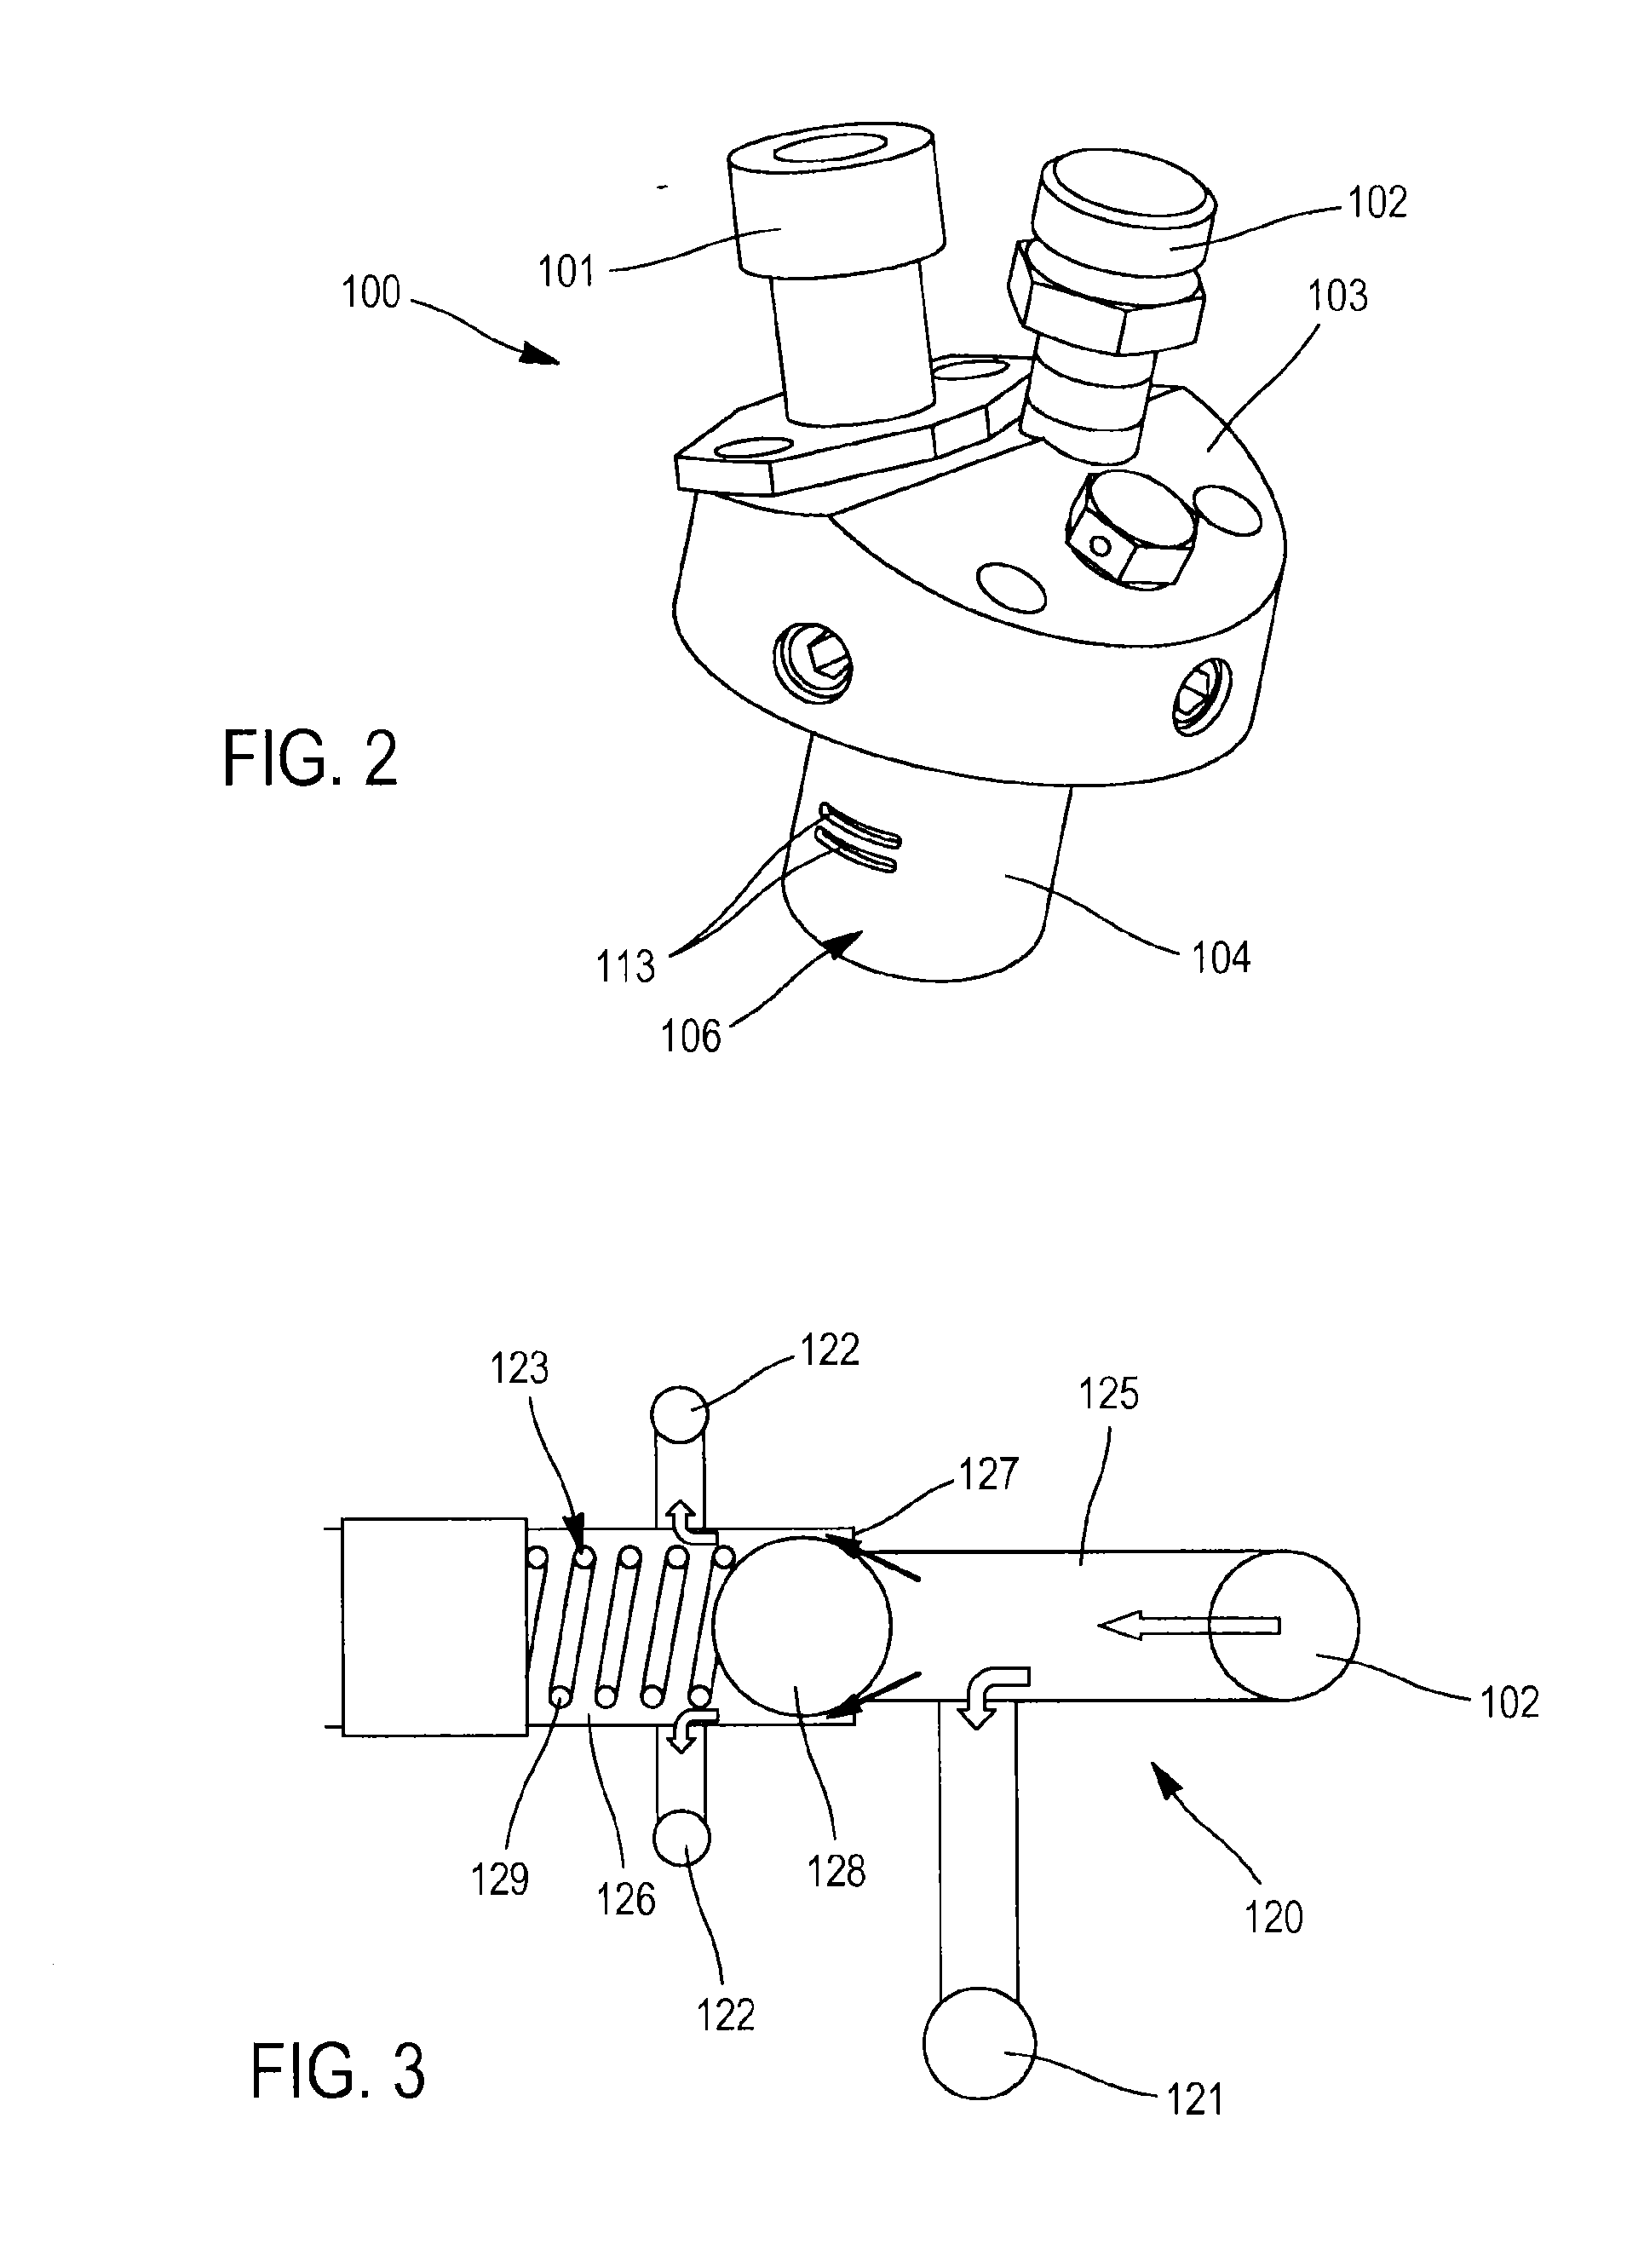 Two-circuit injector for a turbine engine combustion chamber